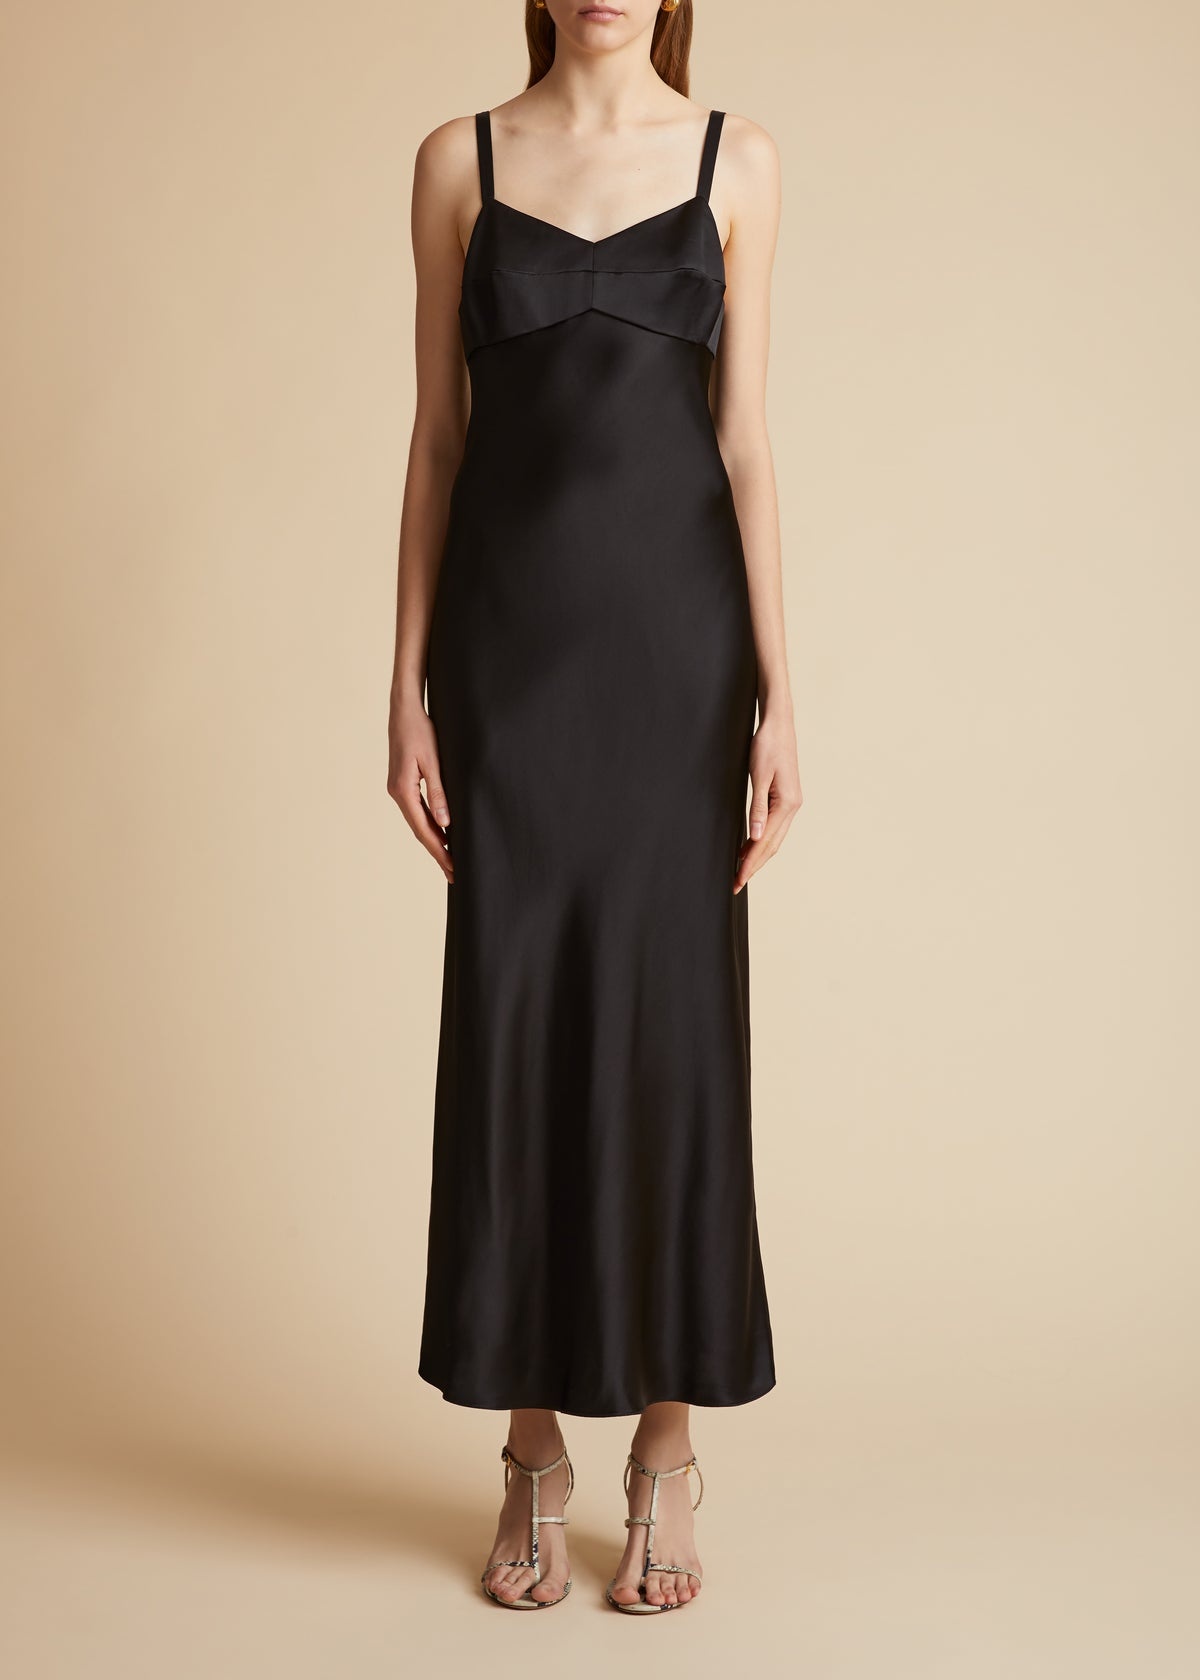 The Joely Dress in Black - 2